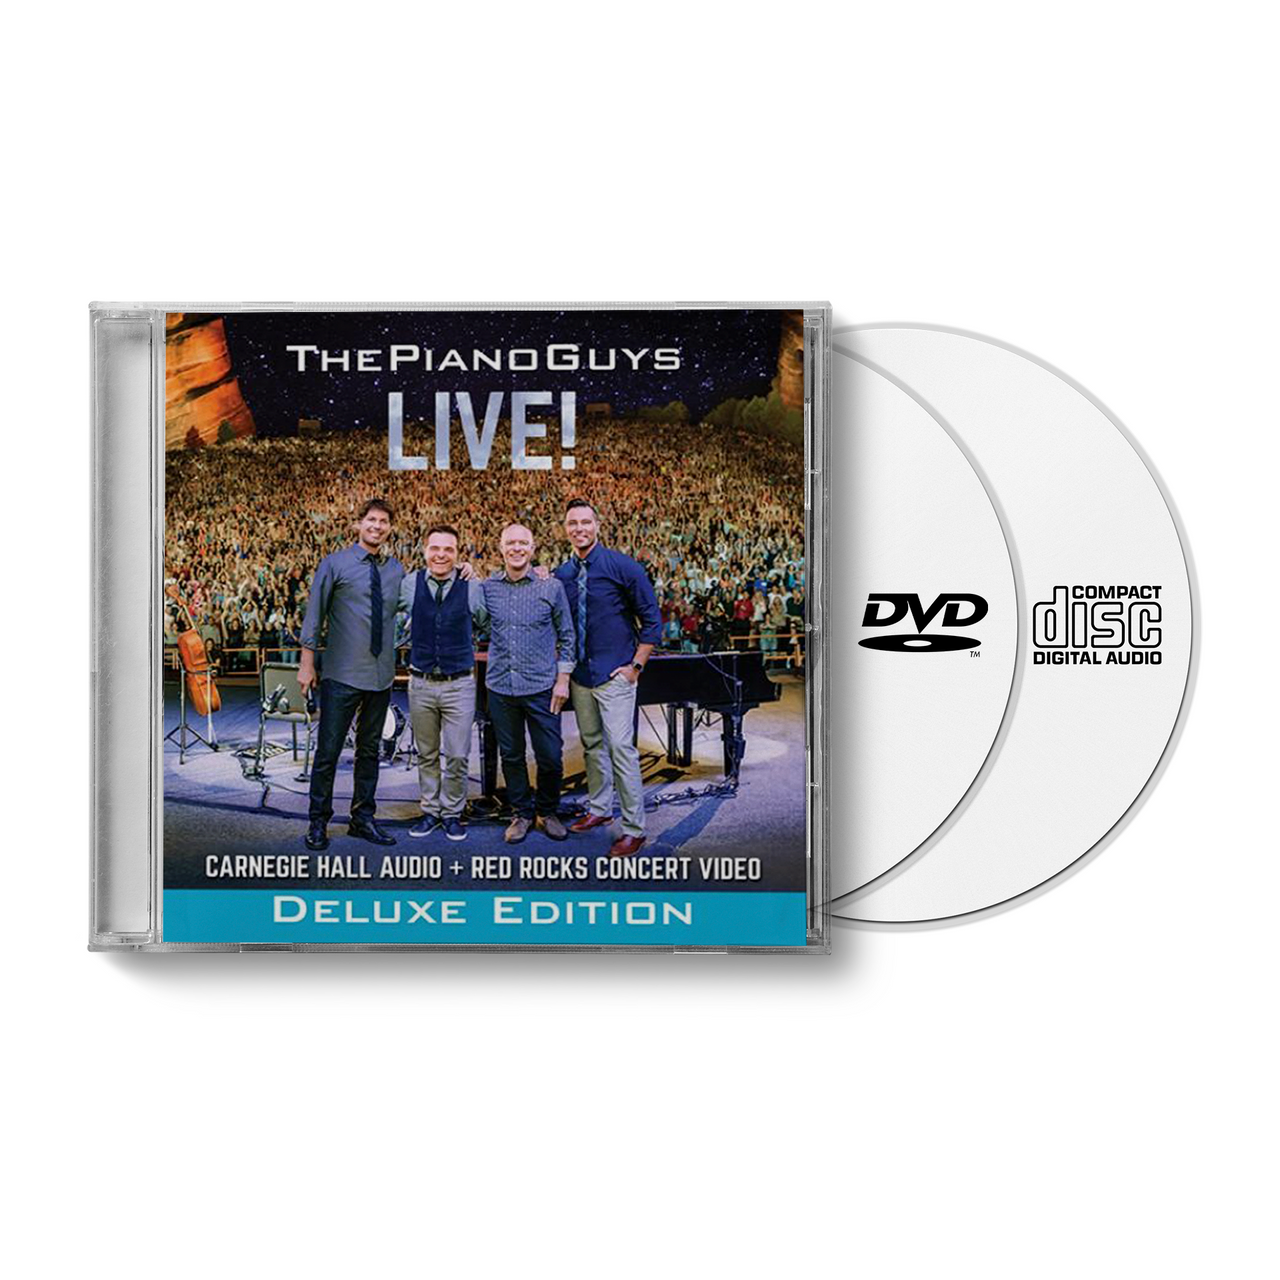 The Piano Guys "LIVE!"